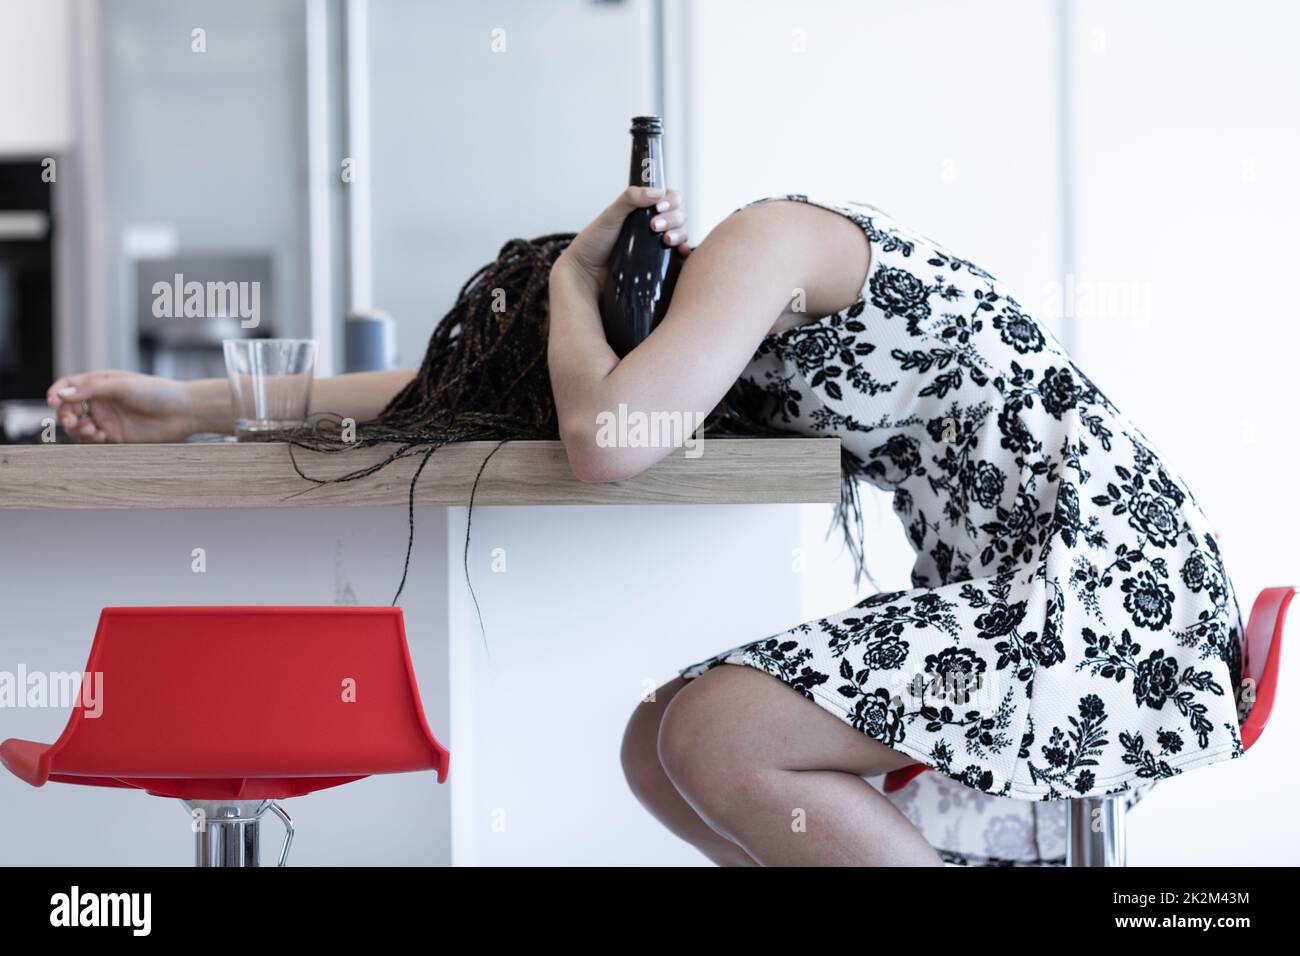 Drunk Young Woman With Her Hair In Dreadlocks Passed Out On A Kitchen 